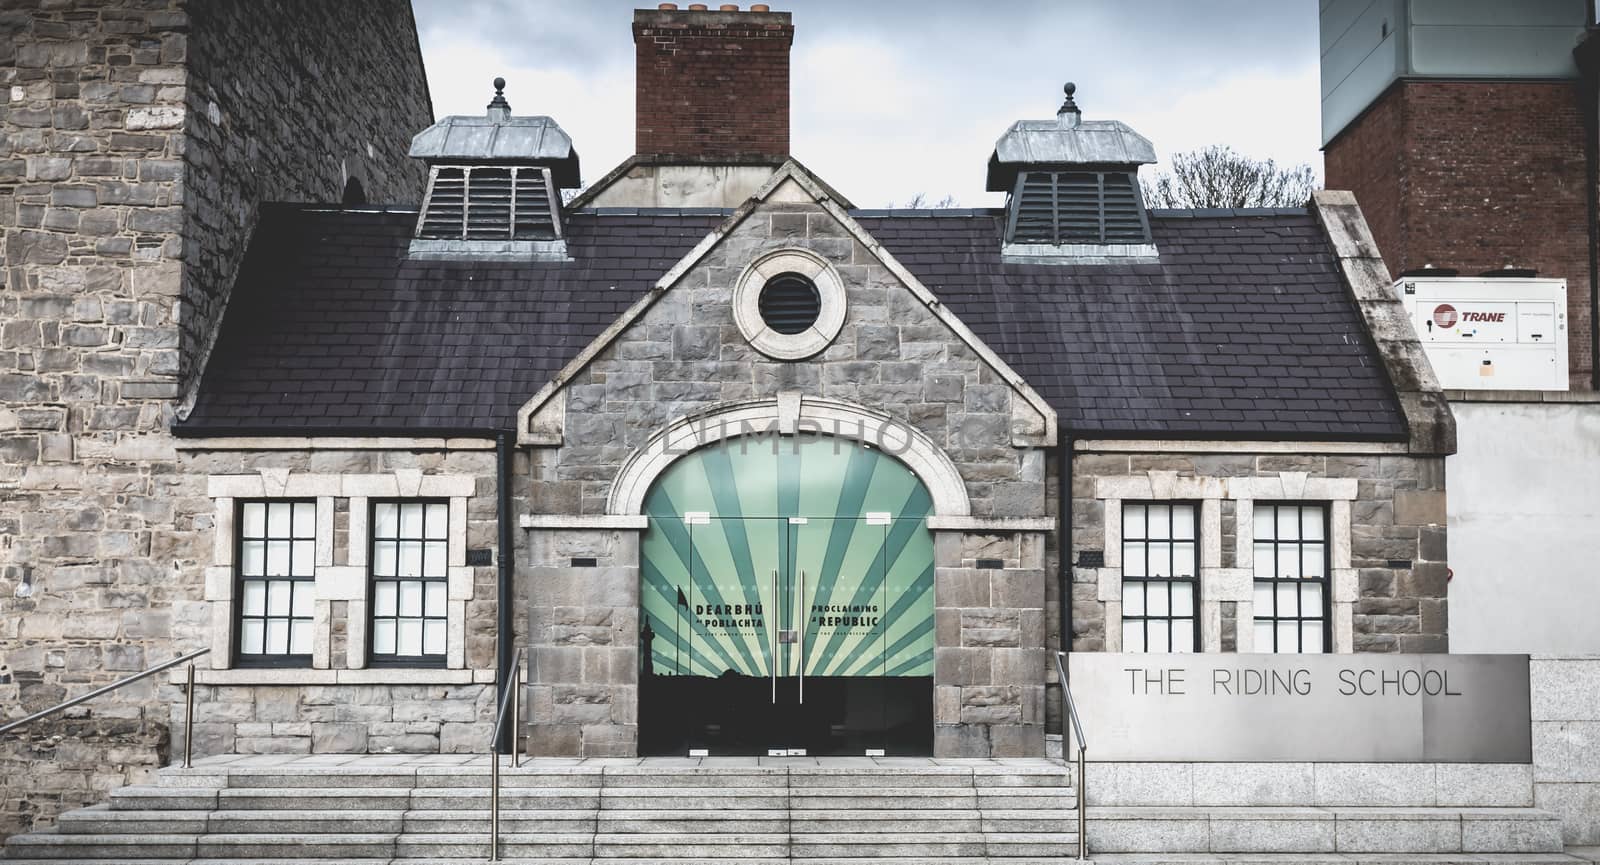 Architectural detail of the riding school in Dublin, Ireland by AtlanticEUROSTOXX